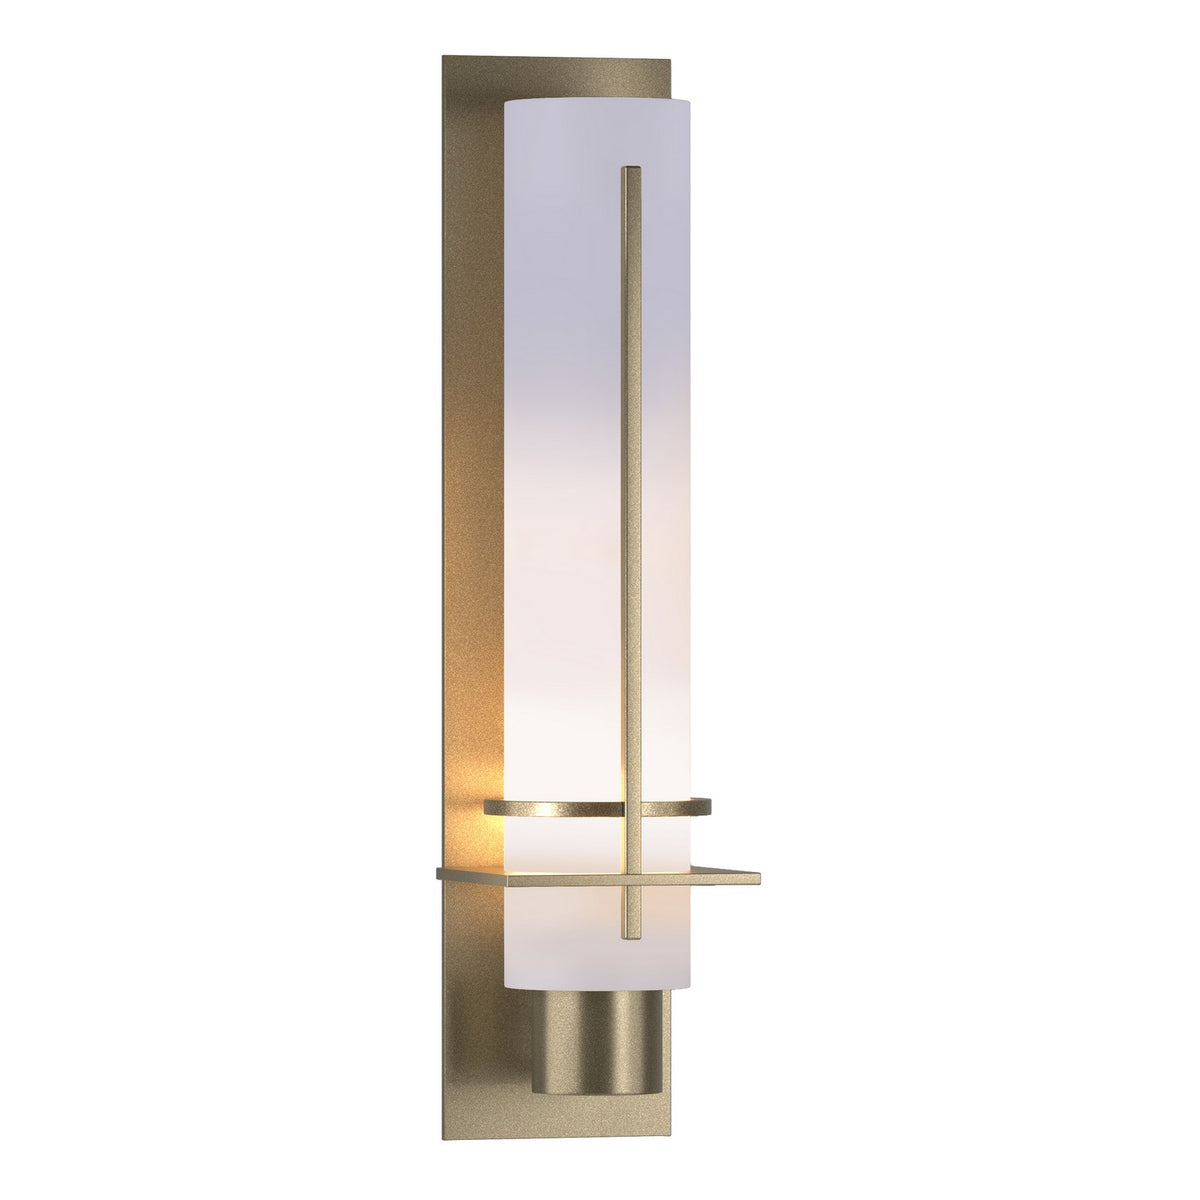 Hubbardton Forge - 207858-SKT-84-GG0173 - One Light Wall Sconce - After Hours - Soft Gold